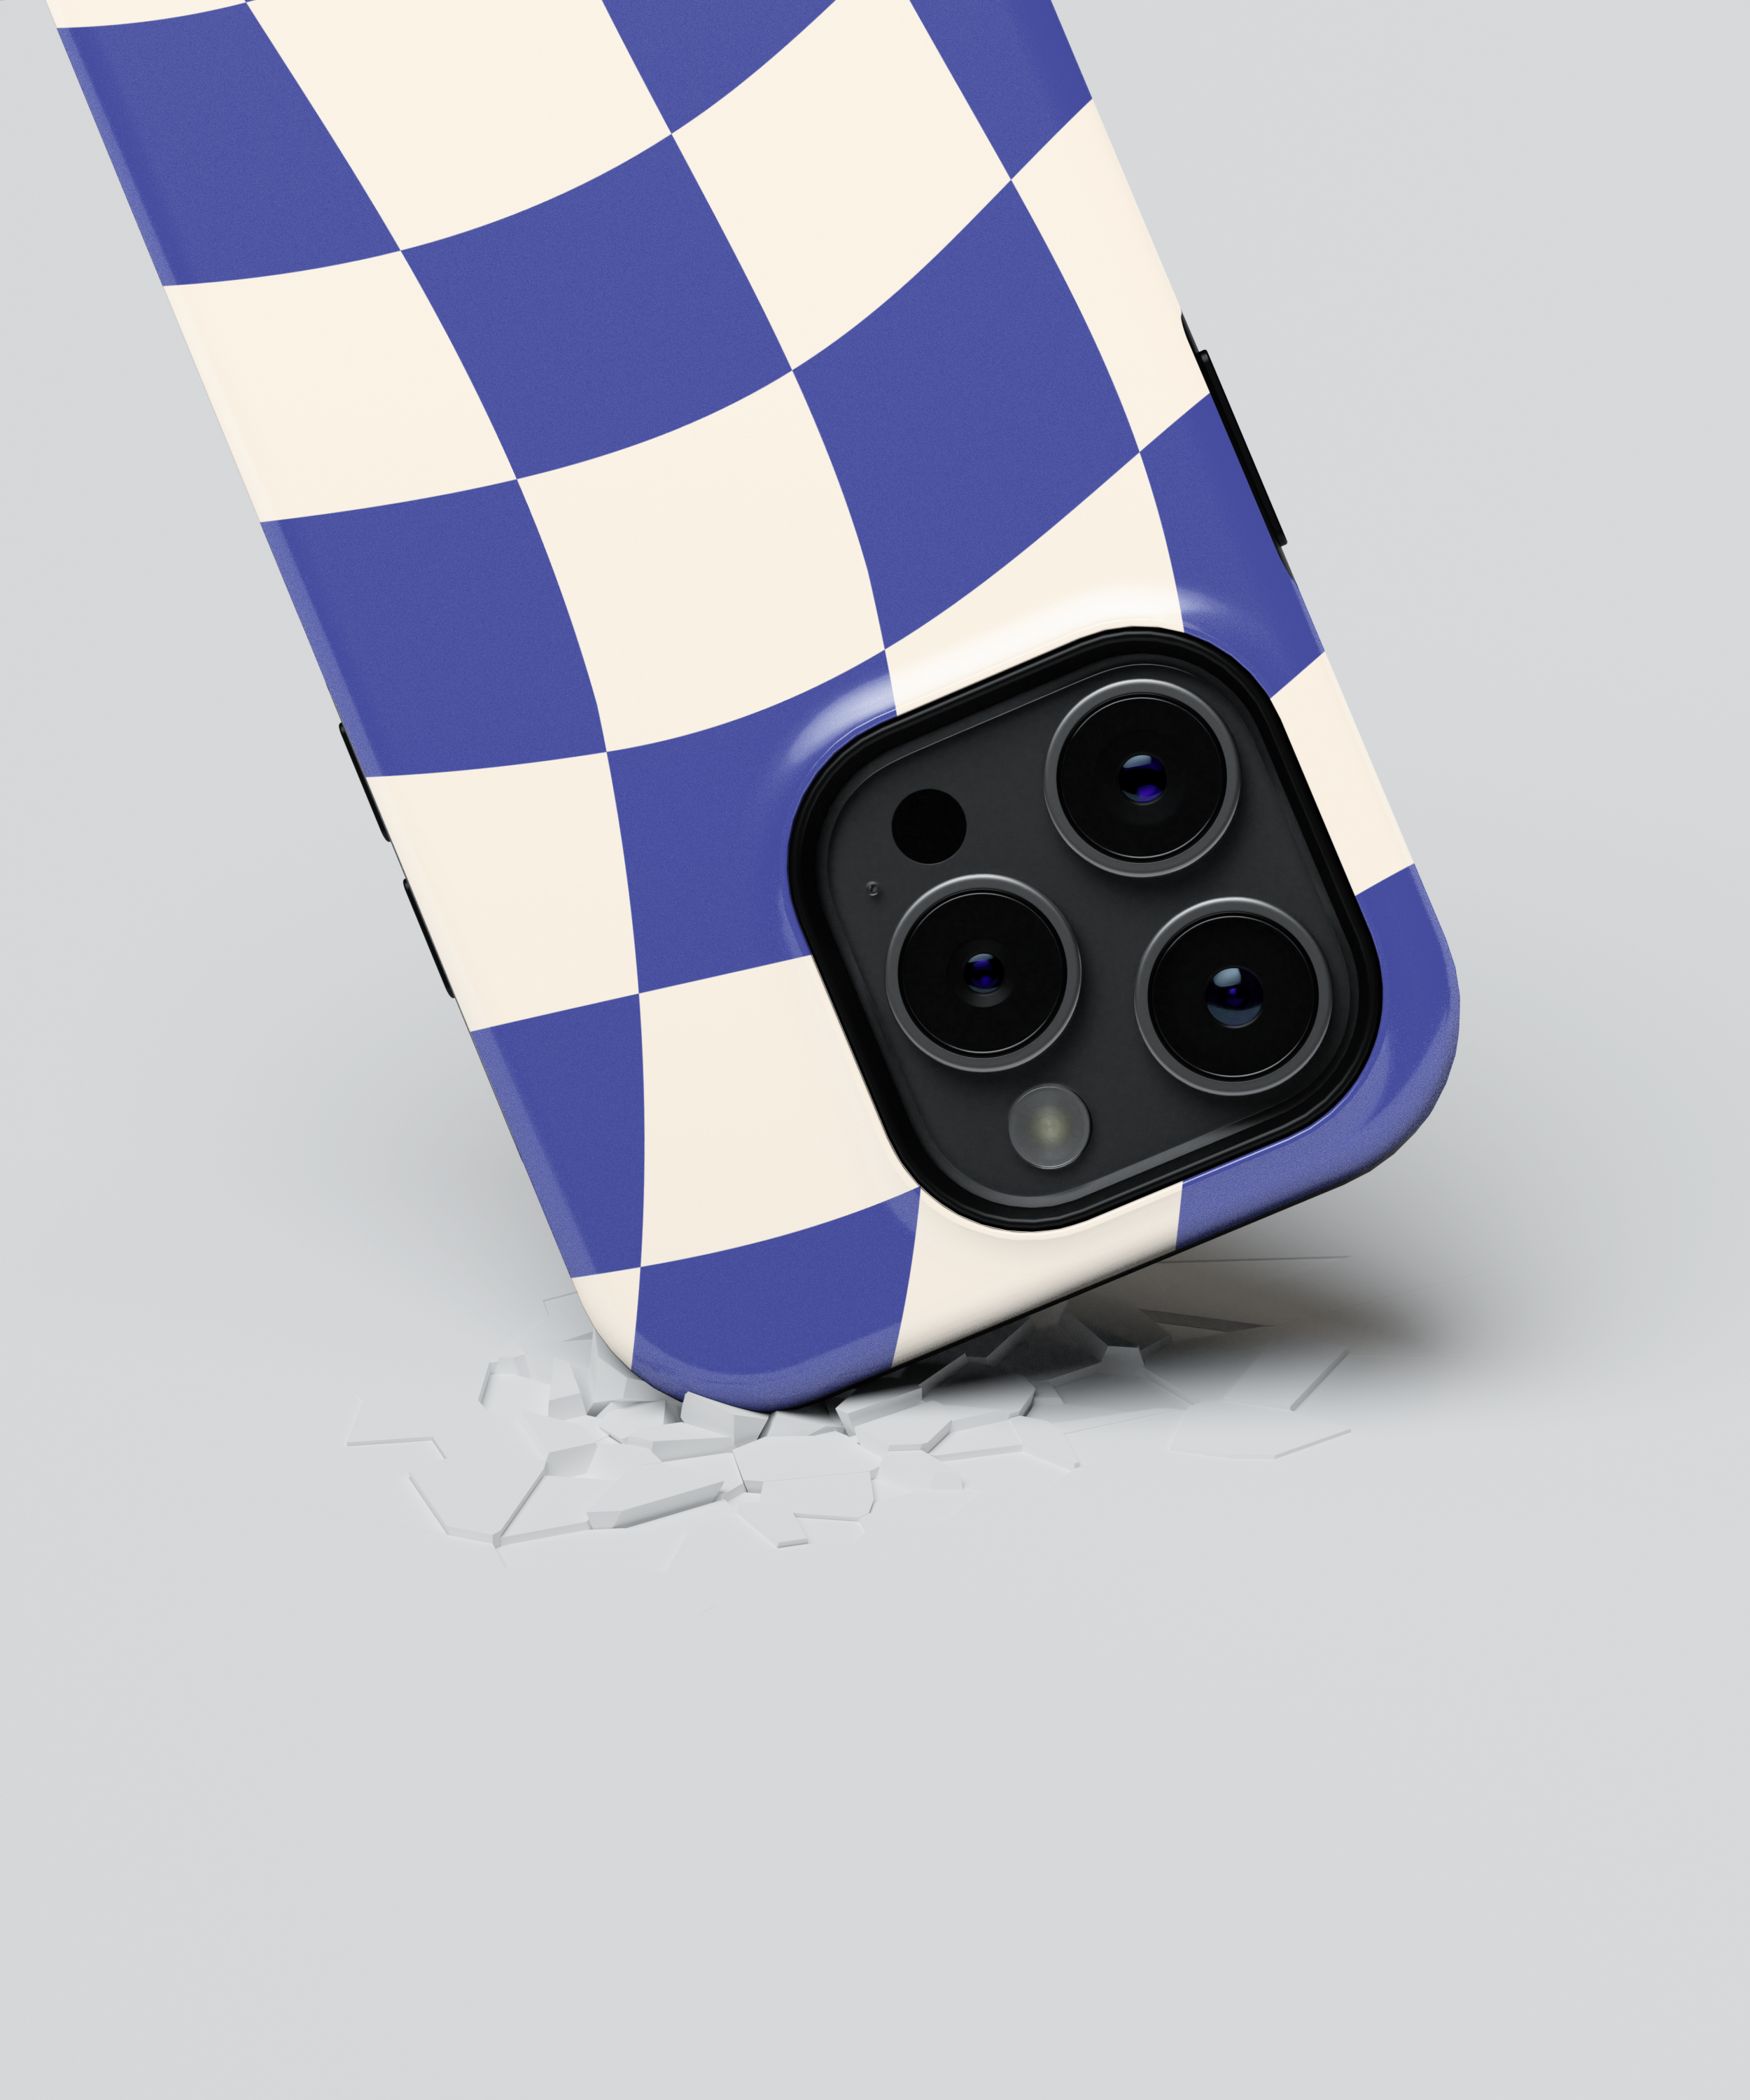 iPhone Tough Case with MagSafe - Azure Checkmate - CASETEROID